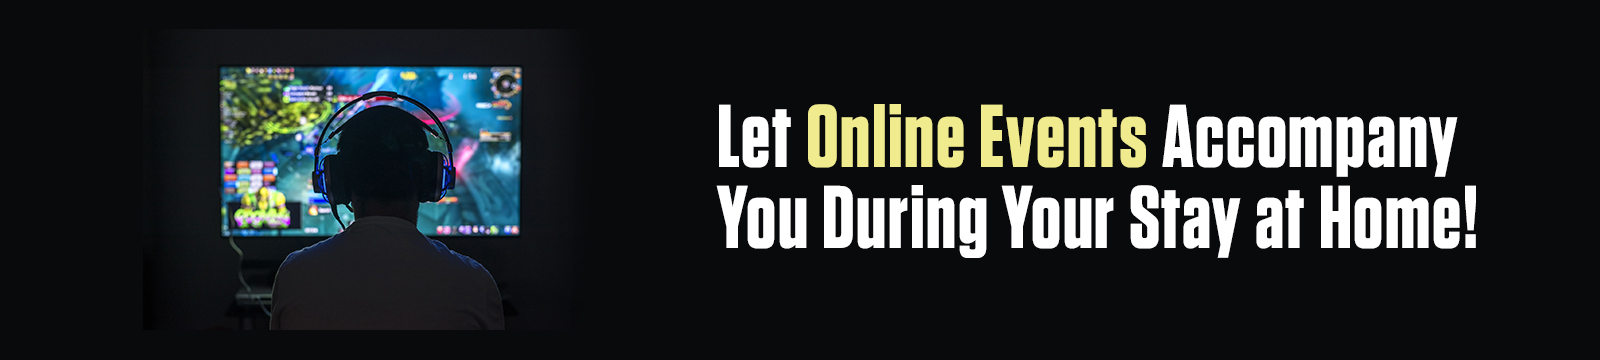 Let Online Events Accompany You During Your Stay at Home!